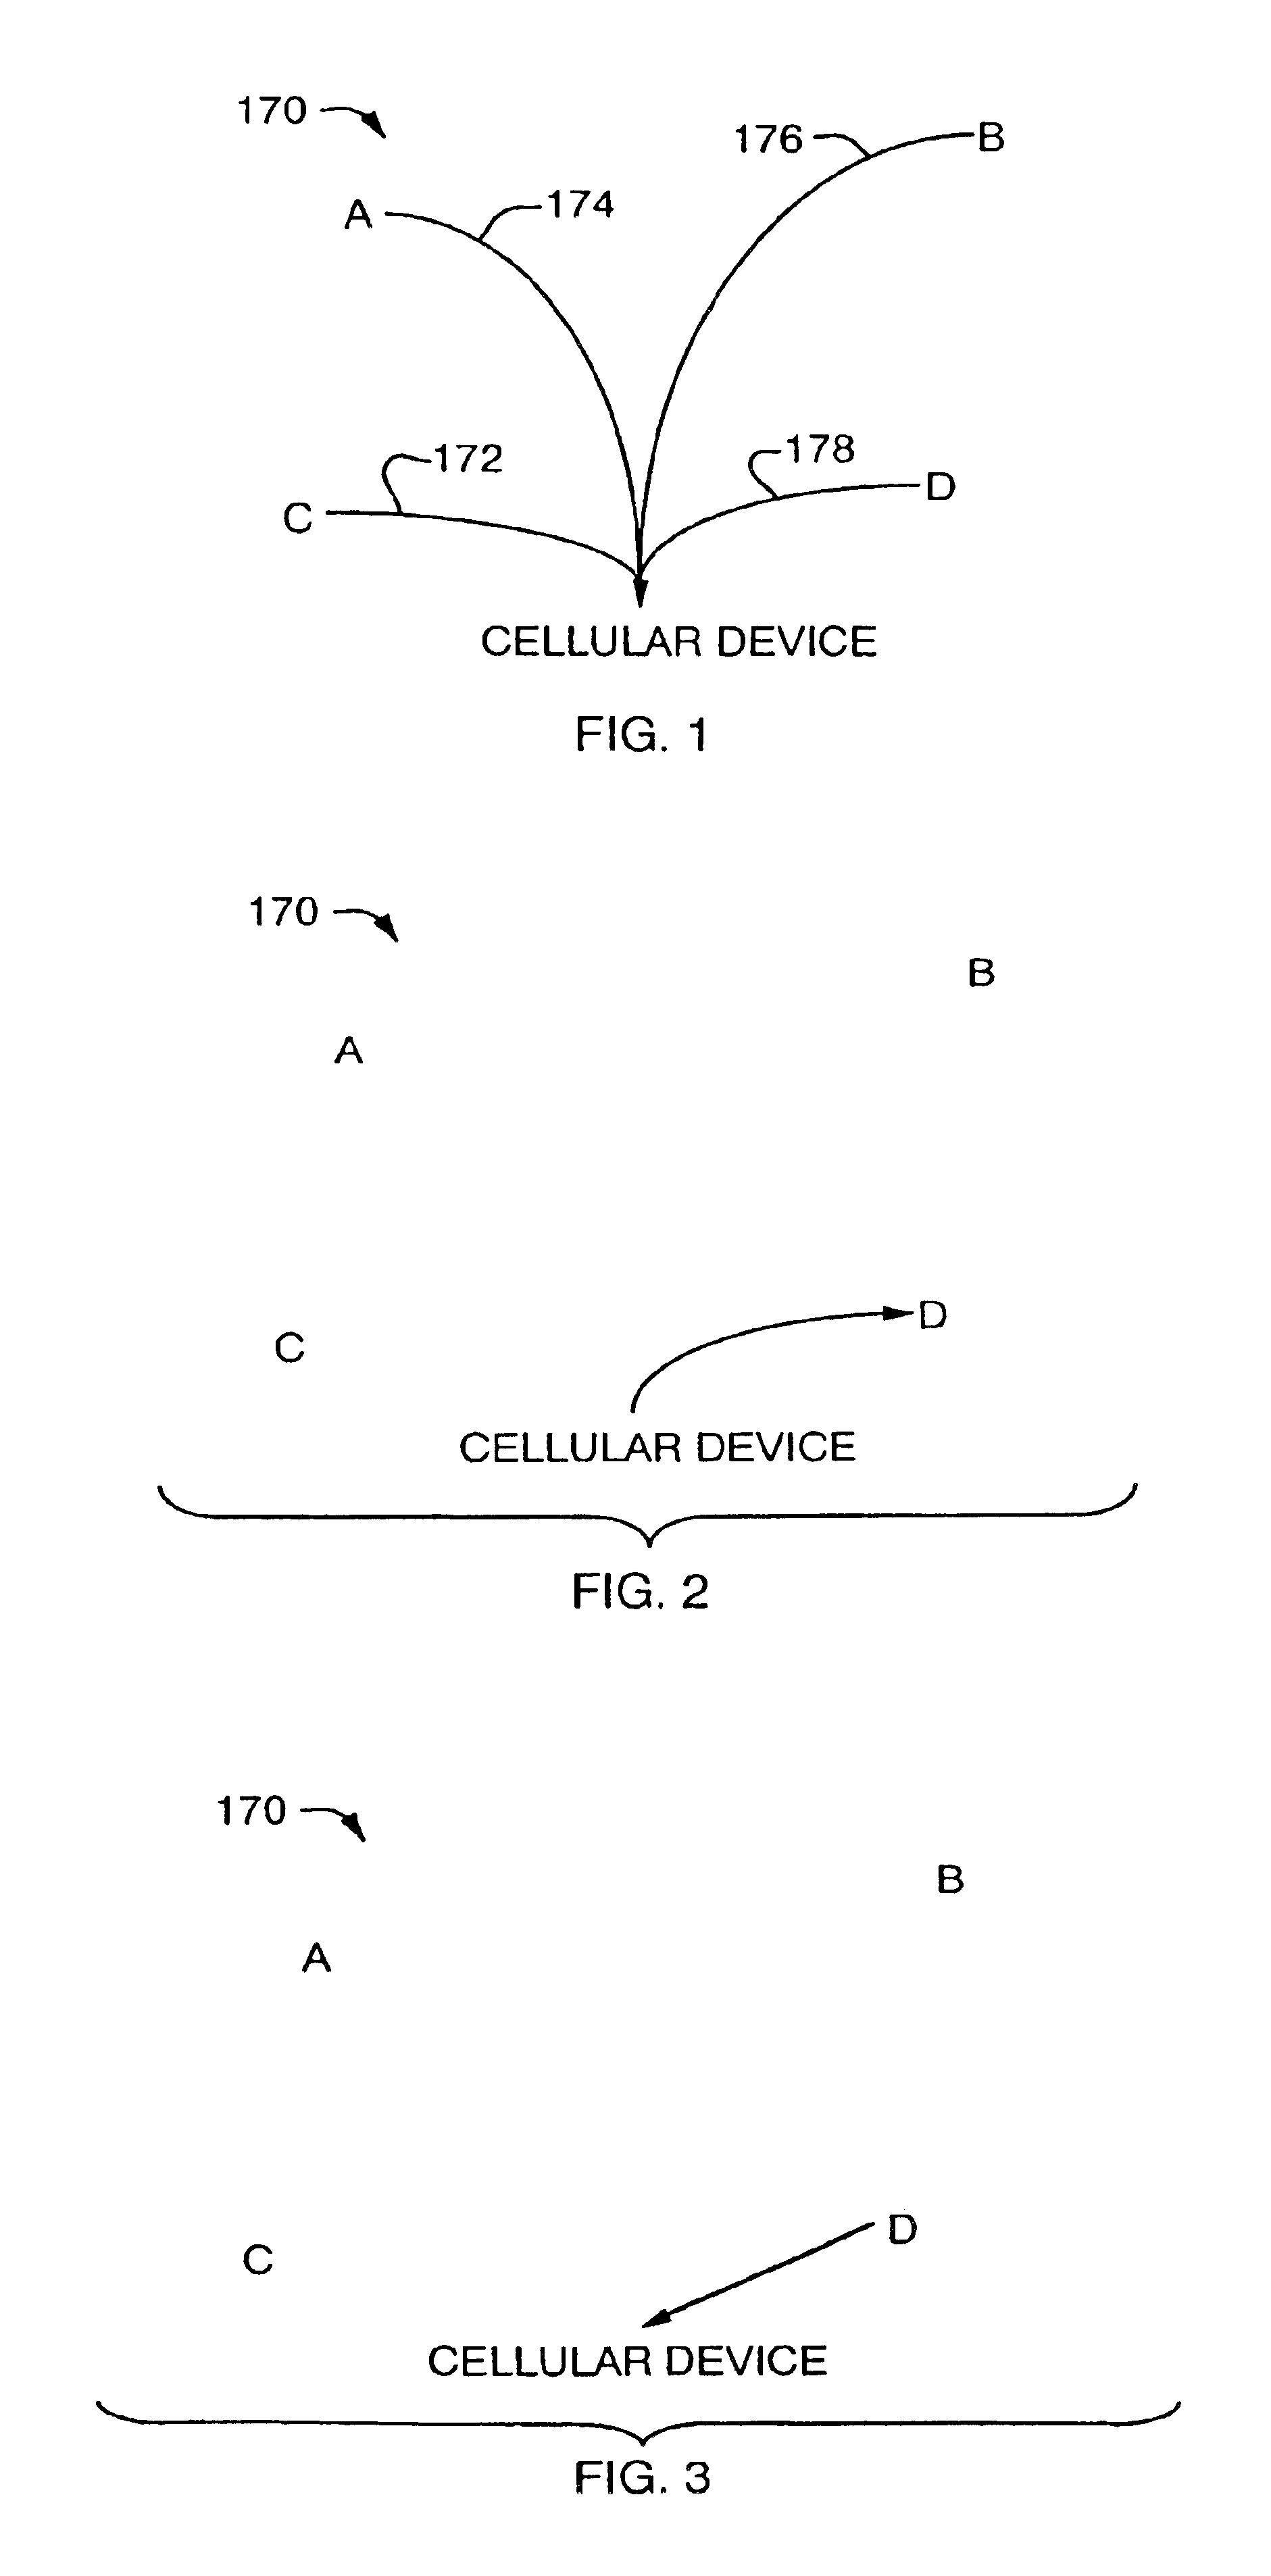 Methods and techniques in channel assignment in a cellular network